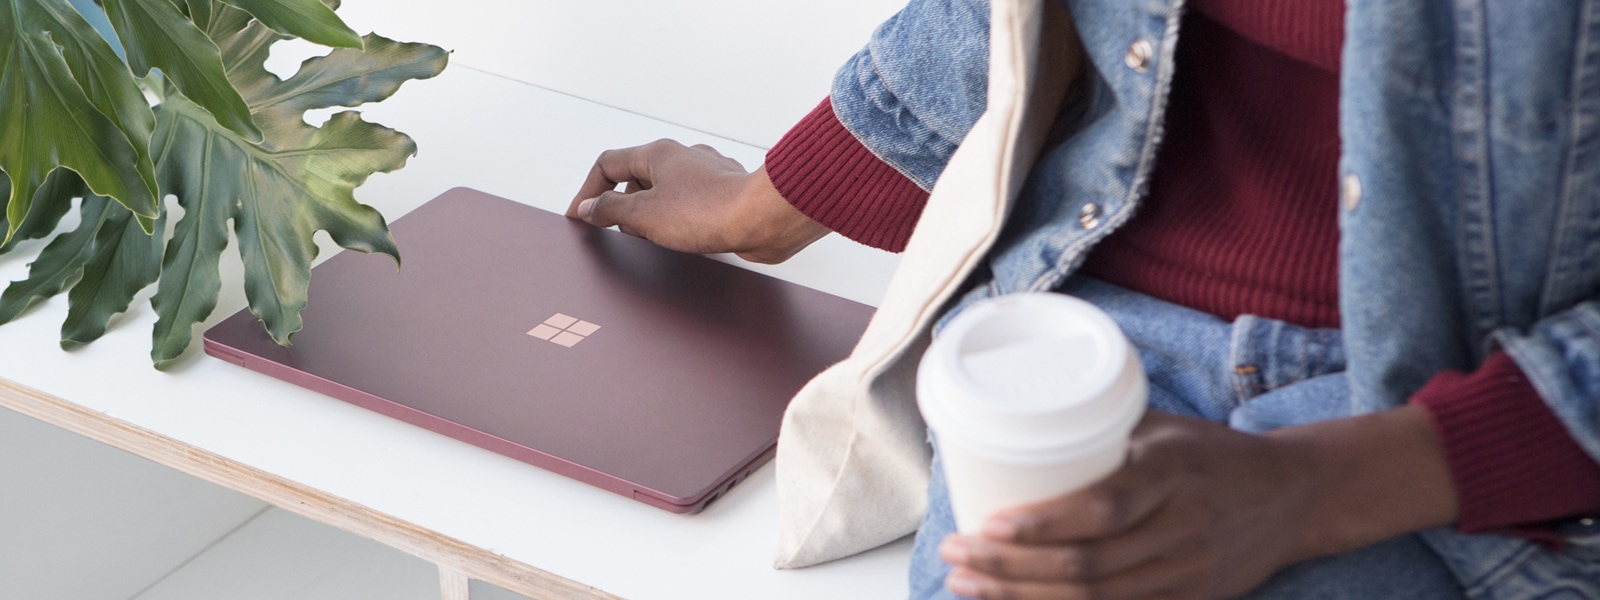 A person picking up a Surface Laptop